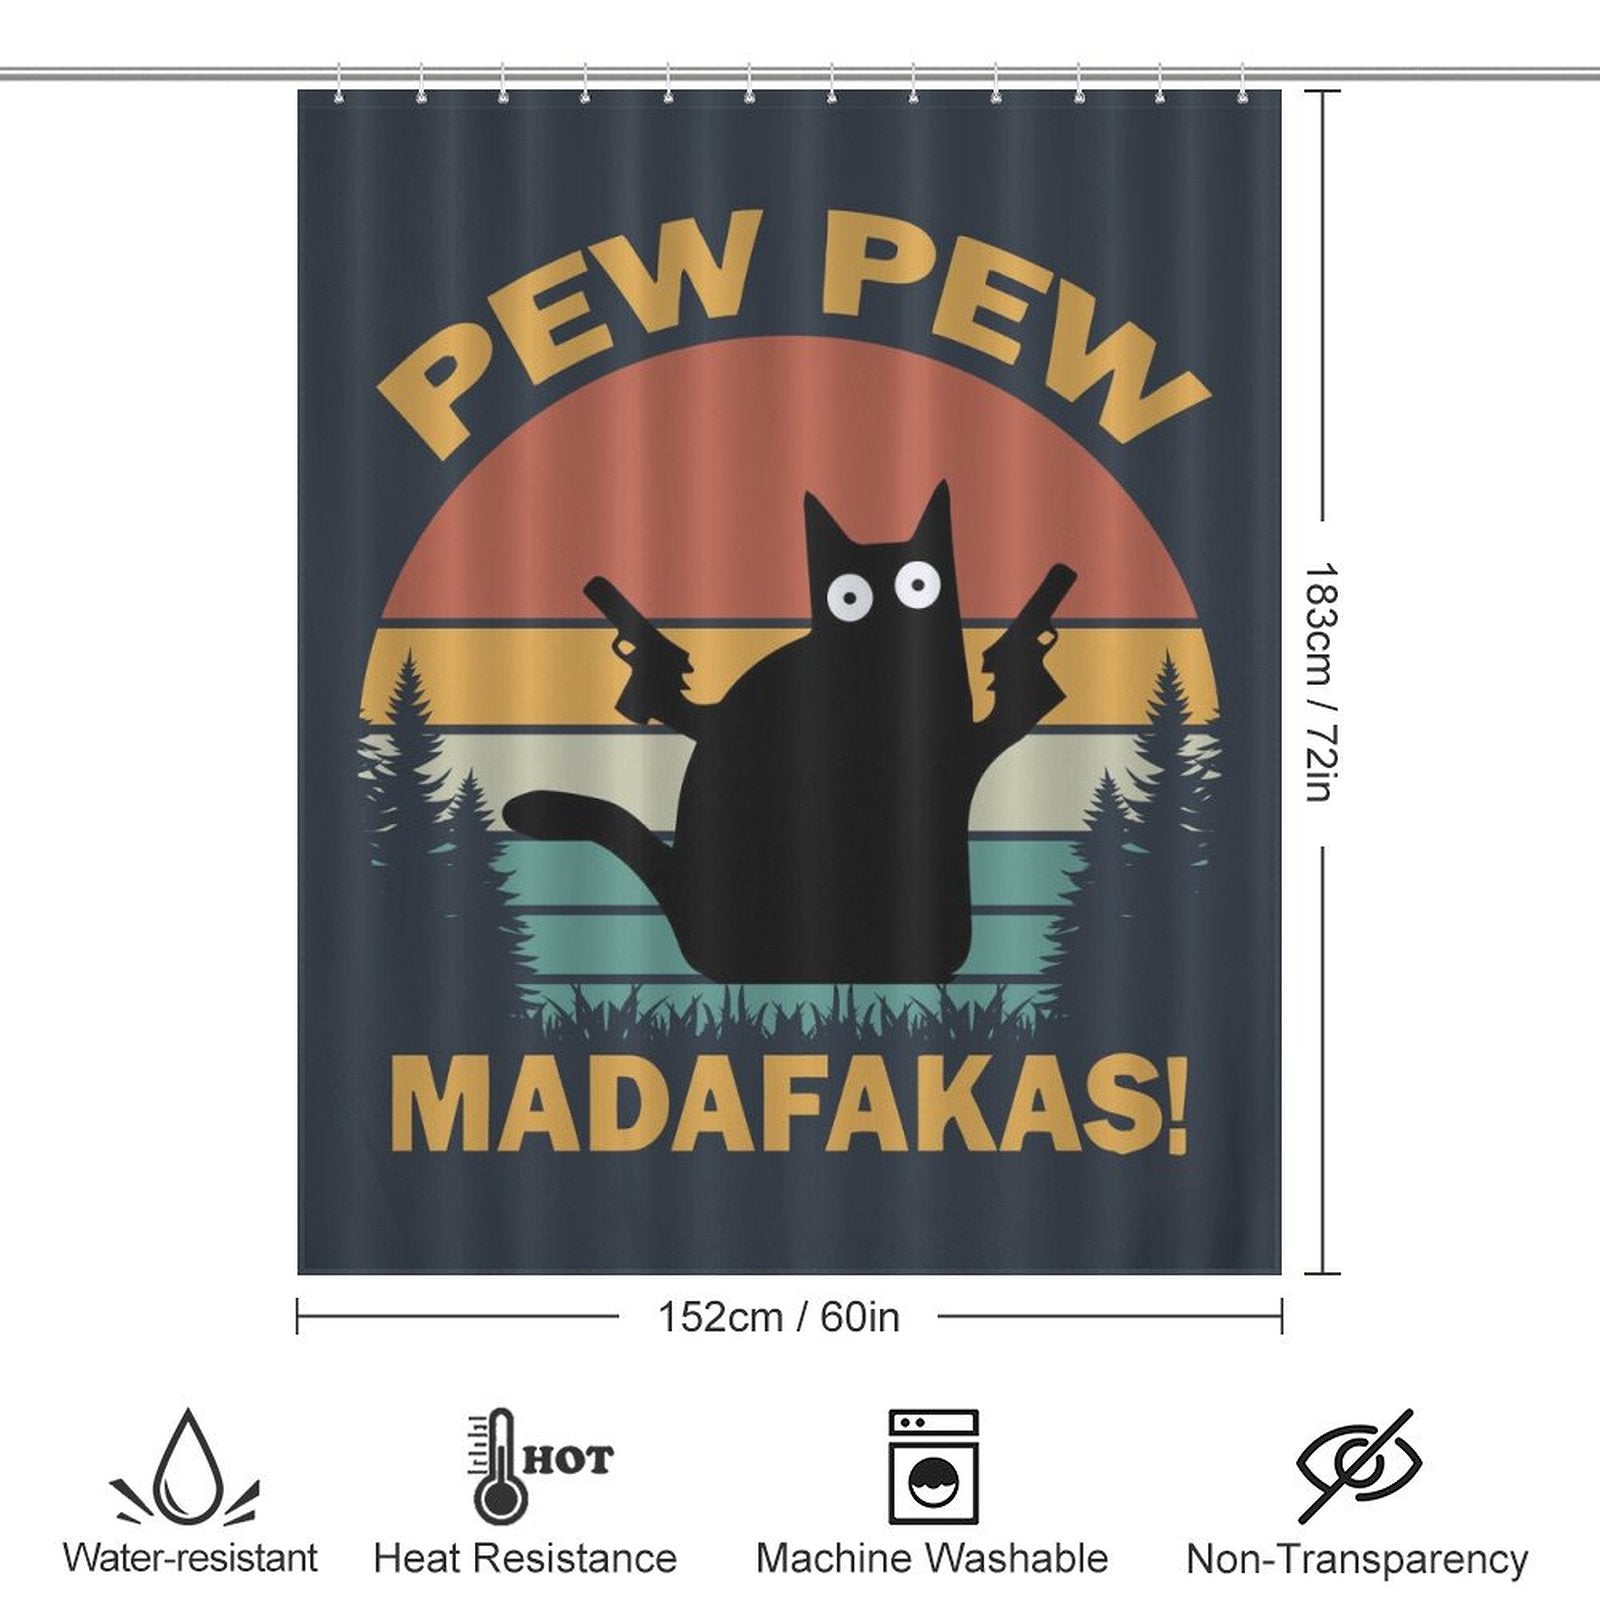 A humorous bathroom decor piece, this Funny Black Crazy Cat with Gun Shower Curtain-Cottoncat features a funny black crazy cat holding guns and text that reads, "Pew Pew Madafakas!" with dimensions 183cm x 152cm. Icons at the bottom indicate water-resistance, heat resistance, and more.